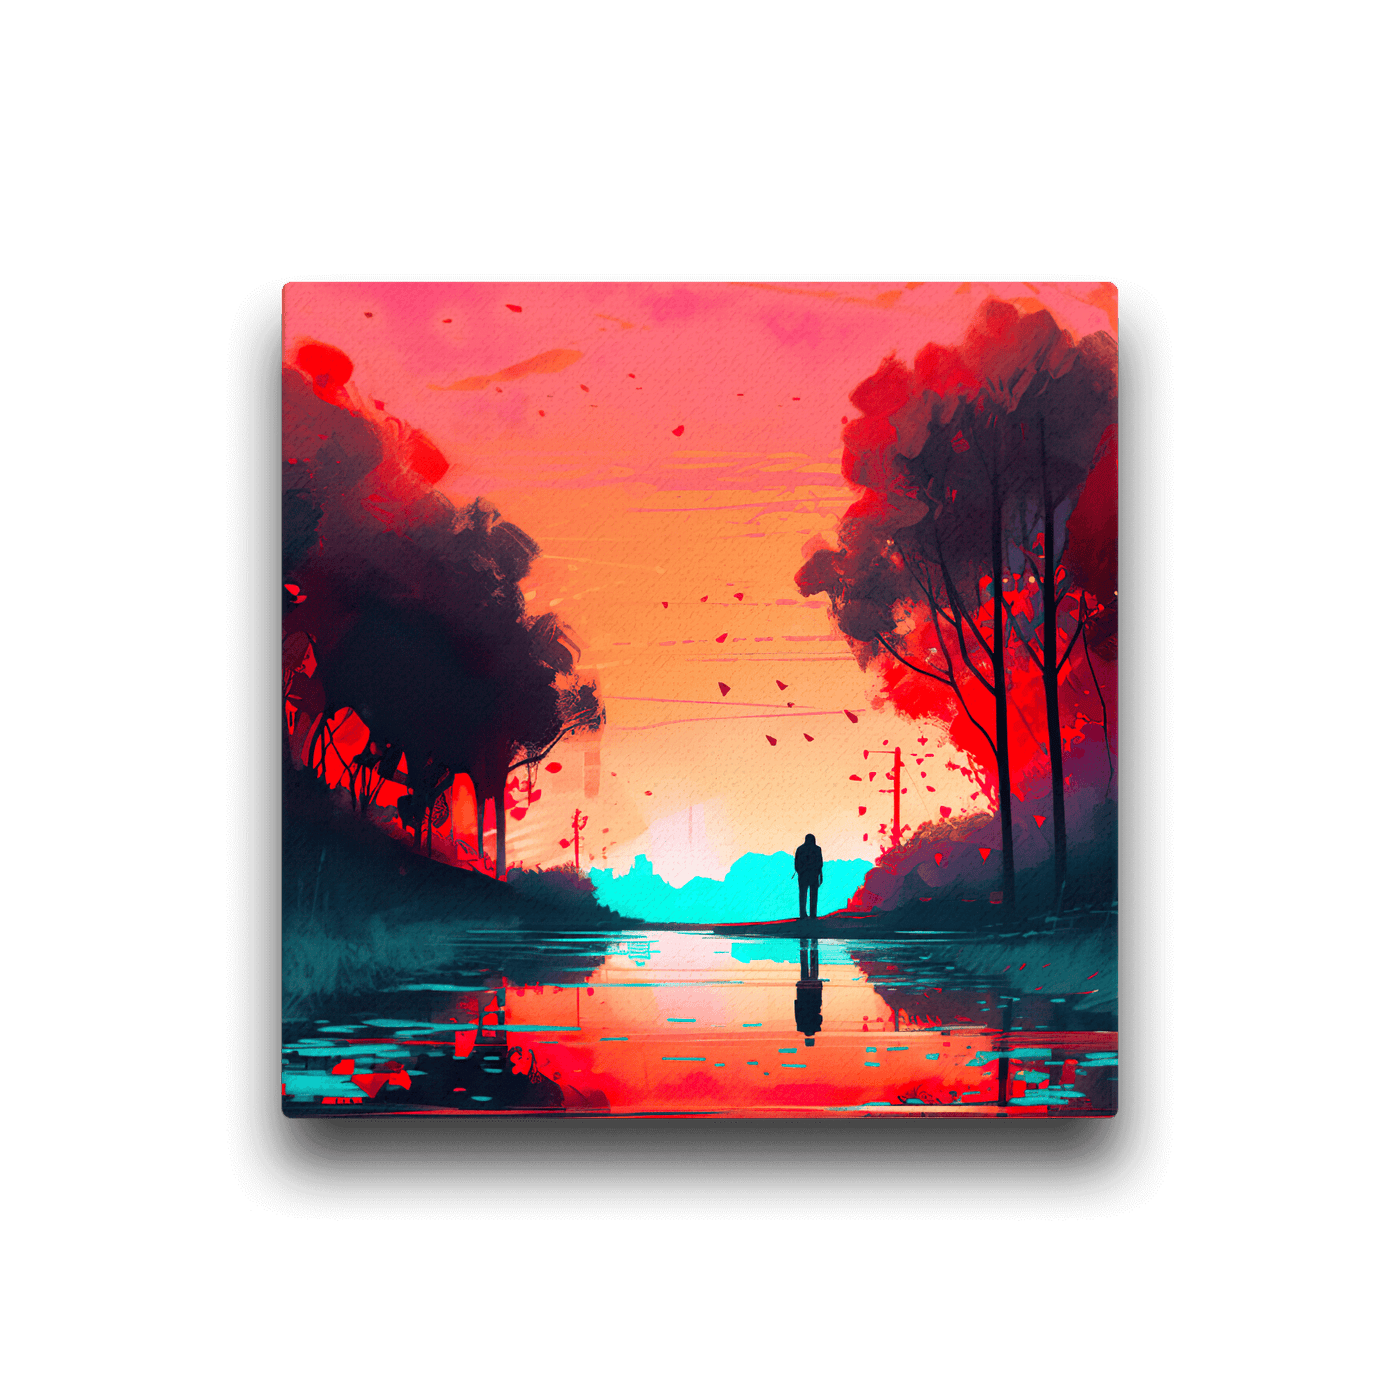 Slim Canvas | Colorful Red Sunrise on reflecting Water